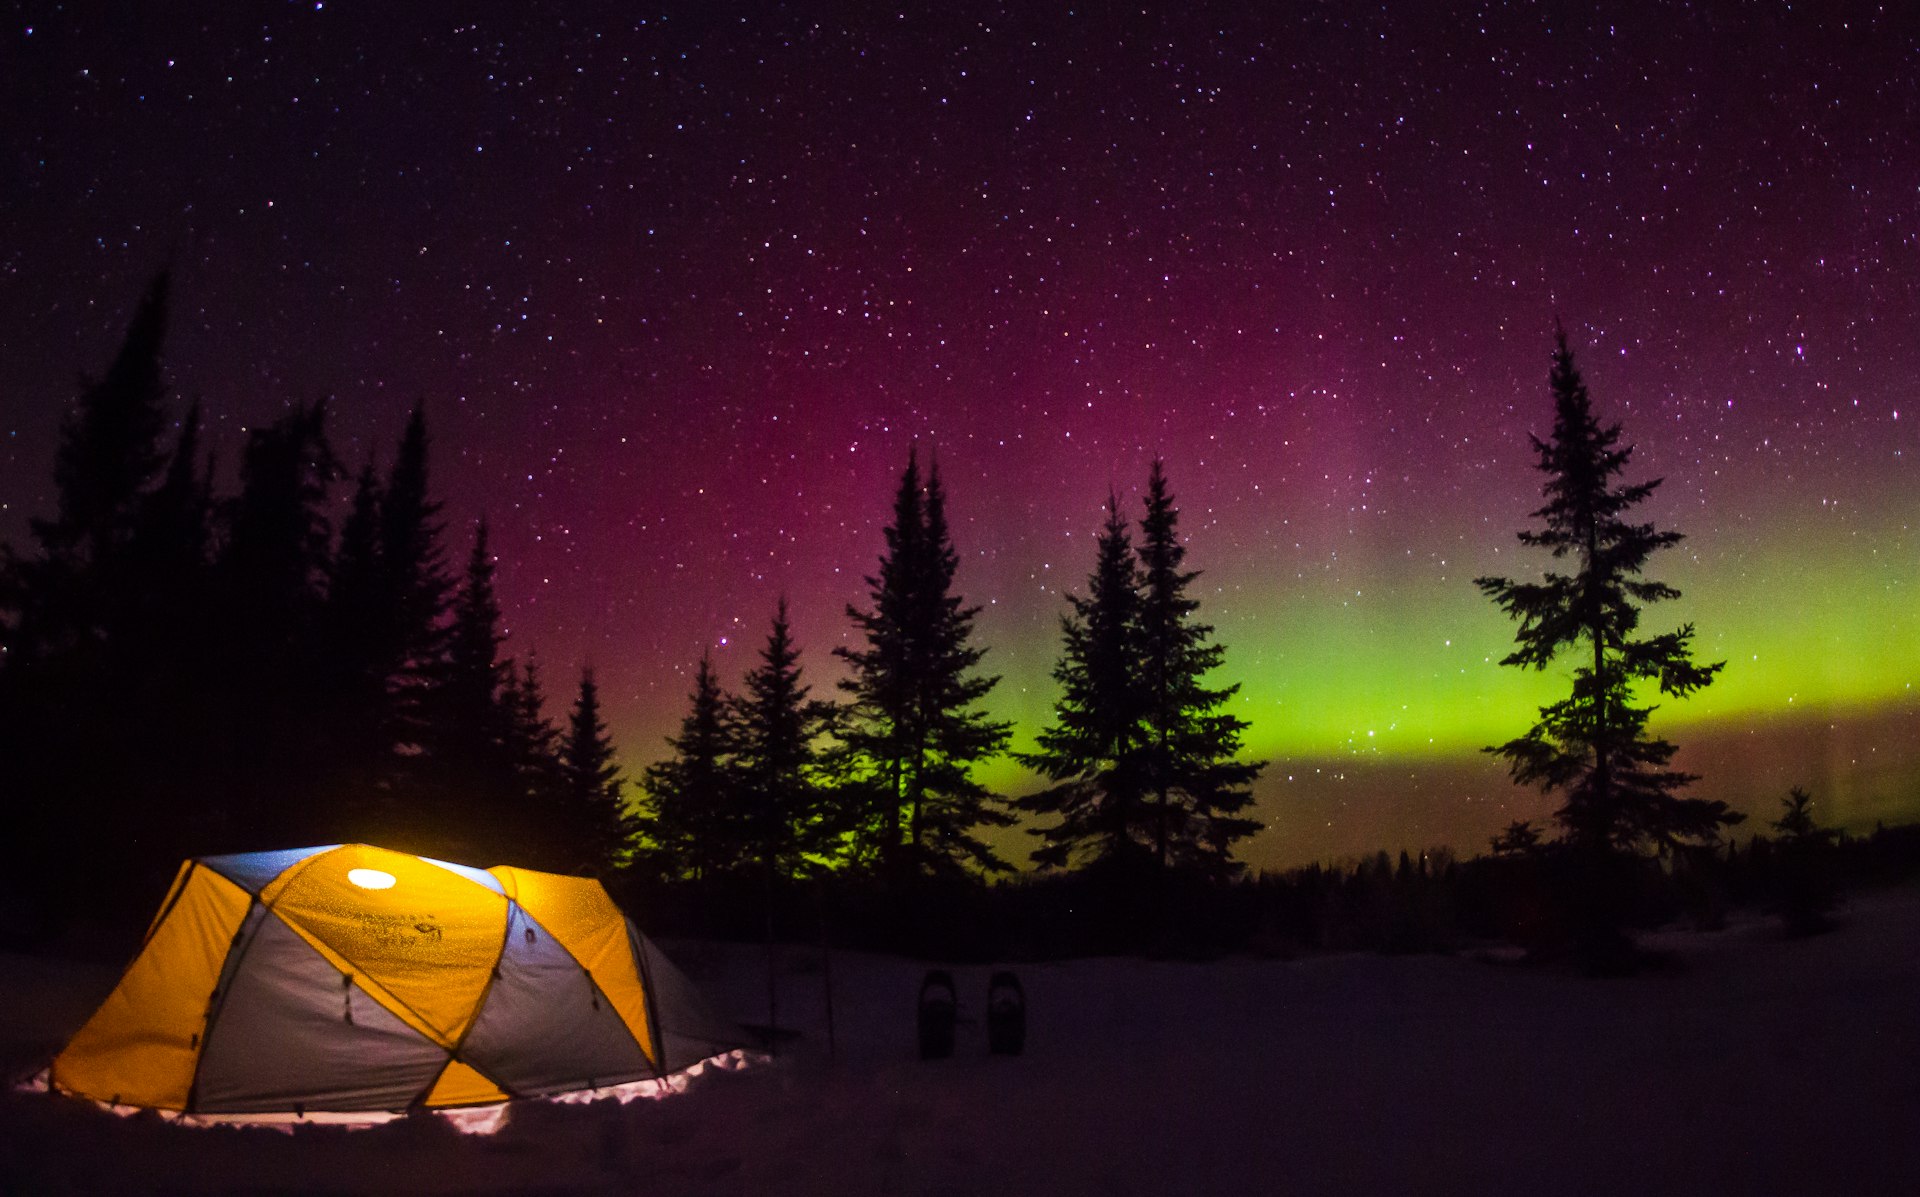 The aurora borealis light up the night sky above a tent pitched in the snow